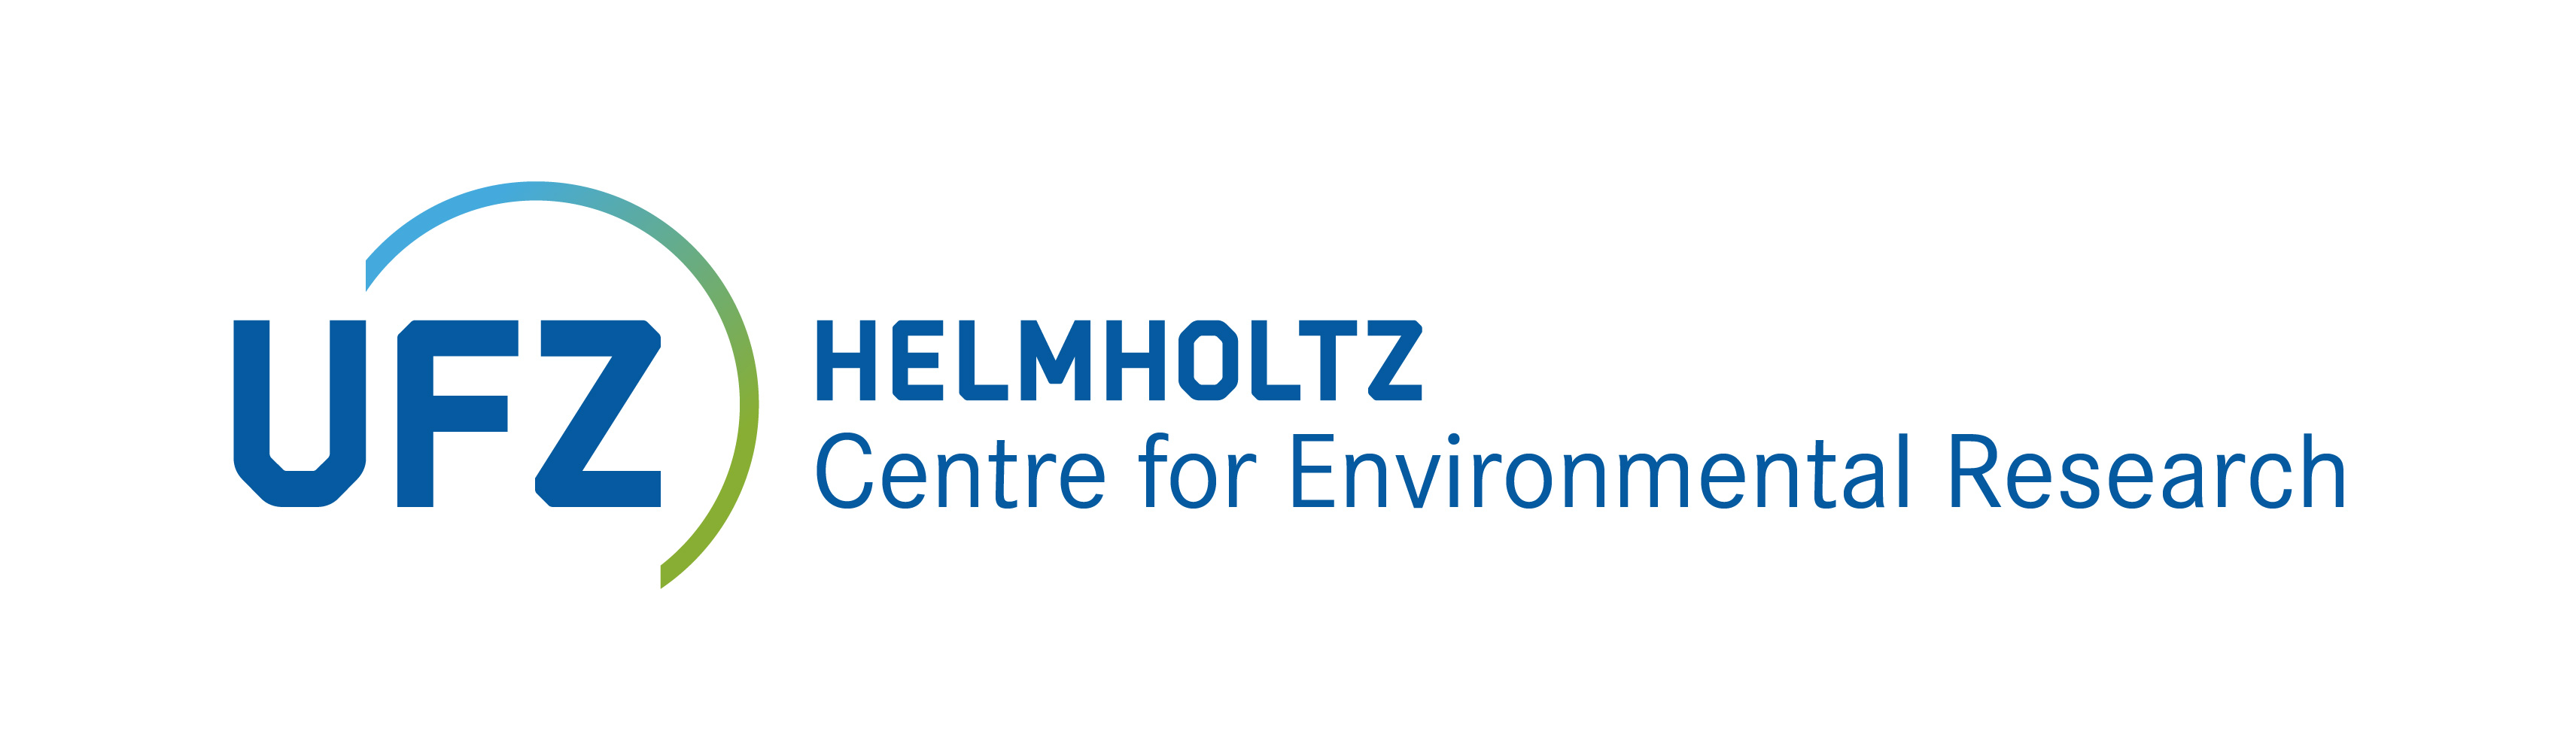 Helmholtz Centre of Environmental Research